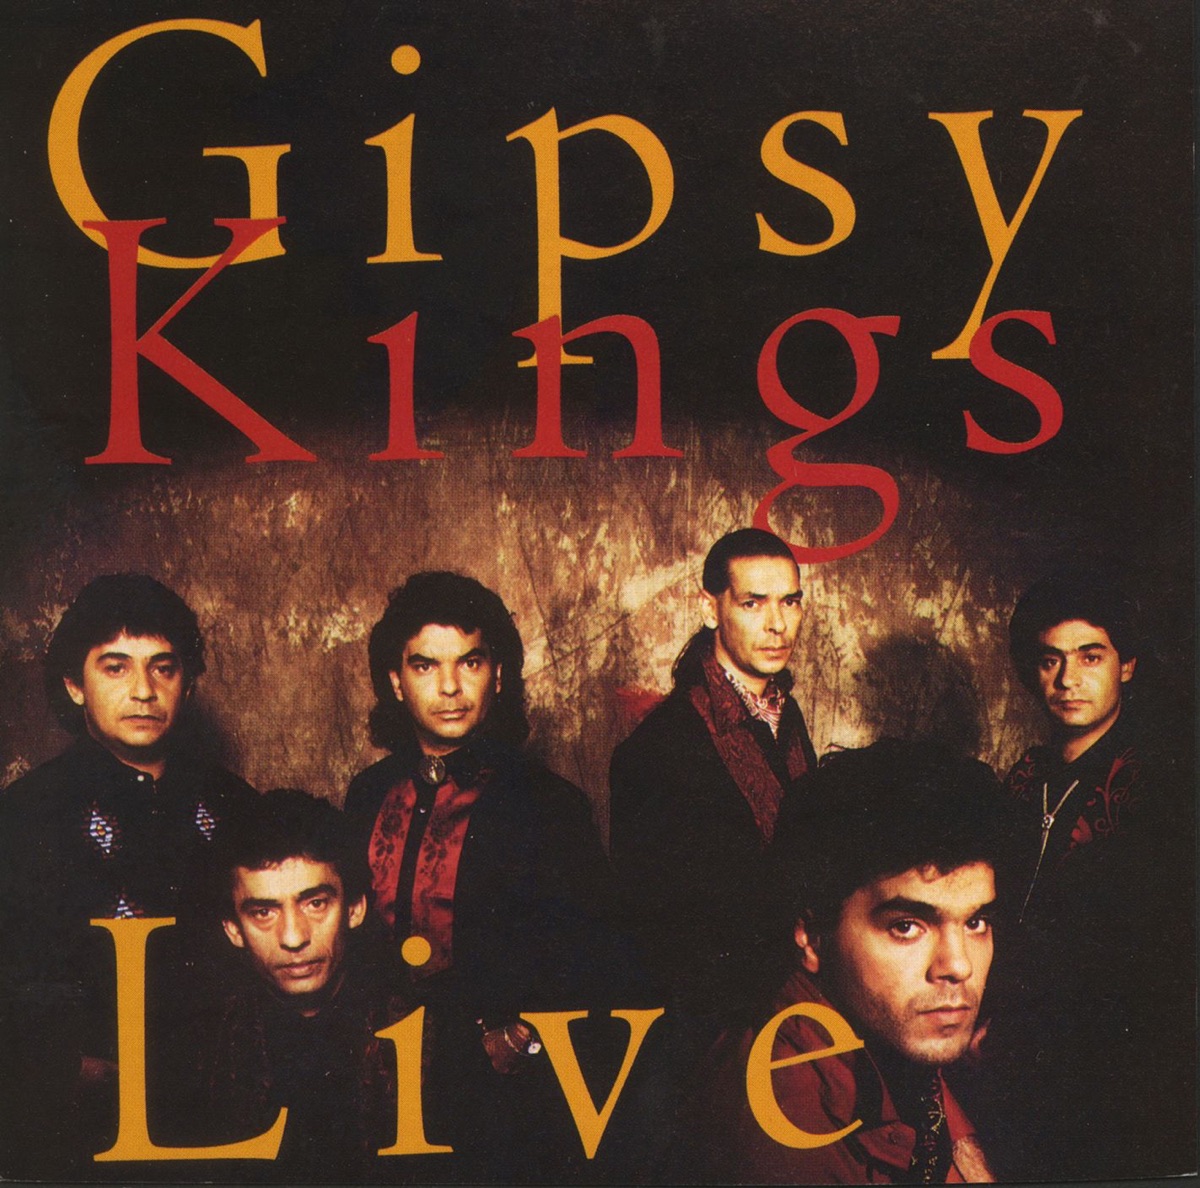 Volare! The Very Best of the Gipsy Kings by Gipsy Kings on Apple Music